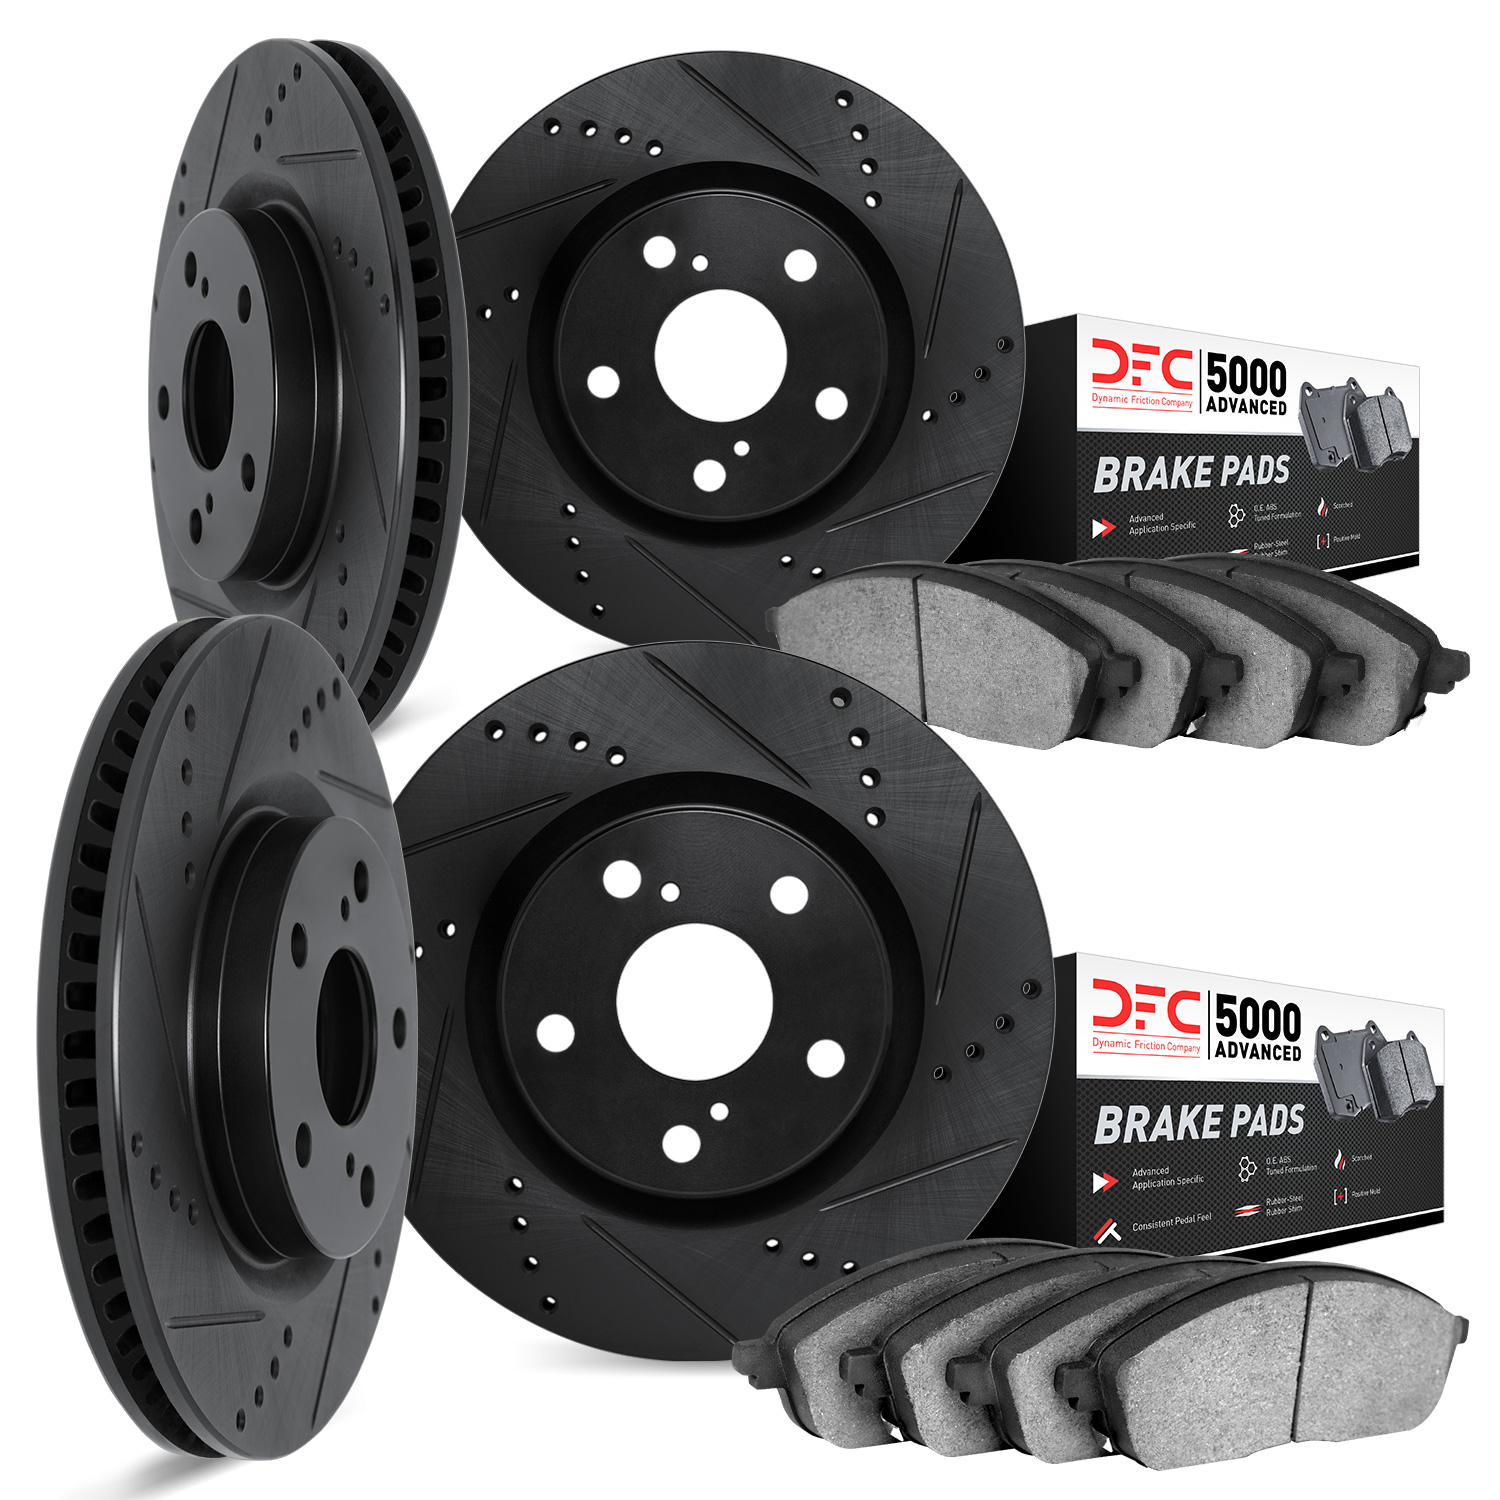 8504-31057 Drilled/Slotted Brake Rotors w/5000 Advanced Brake Pads Kit [Black], 2017-2019 BMW, Position: Front and Rear